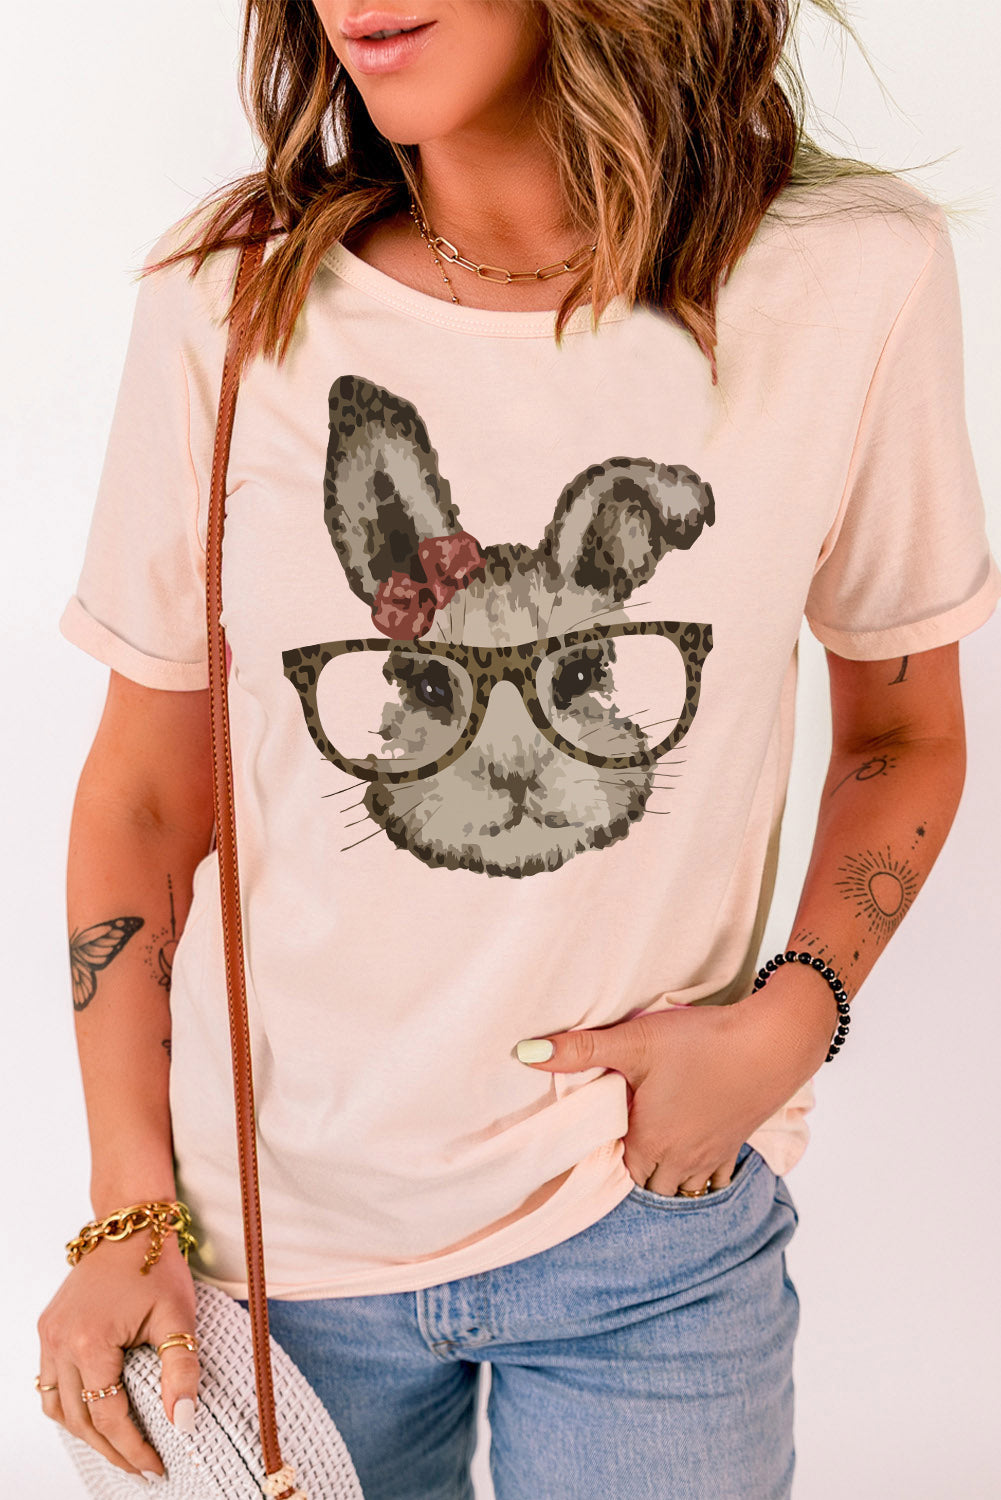 Cuffed Sleeve Women's Easter Tee – Peter Cottontail - T-Shirt - Cultureopolis